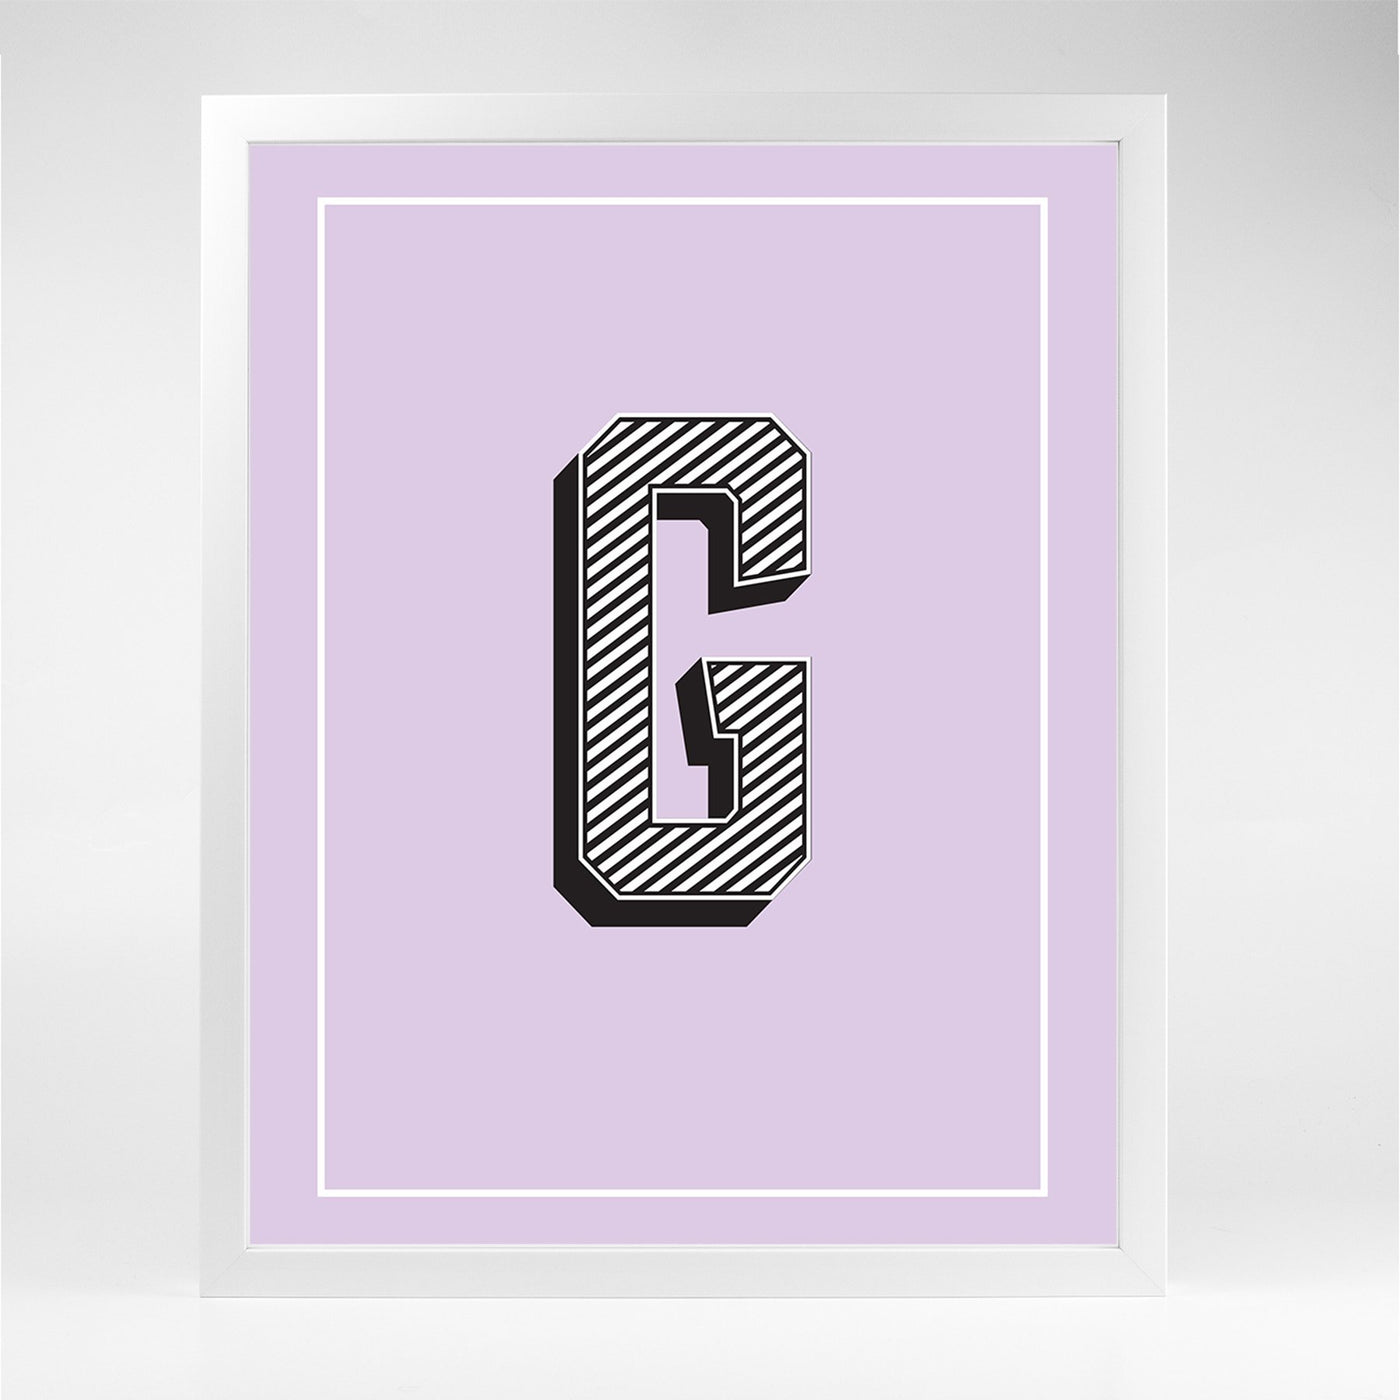 Gallery Prints G The Letter Series dombezalergii